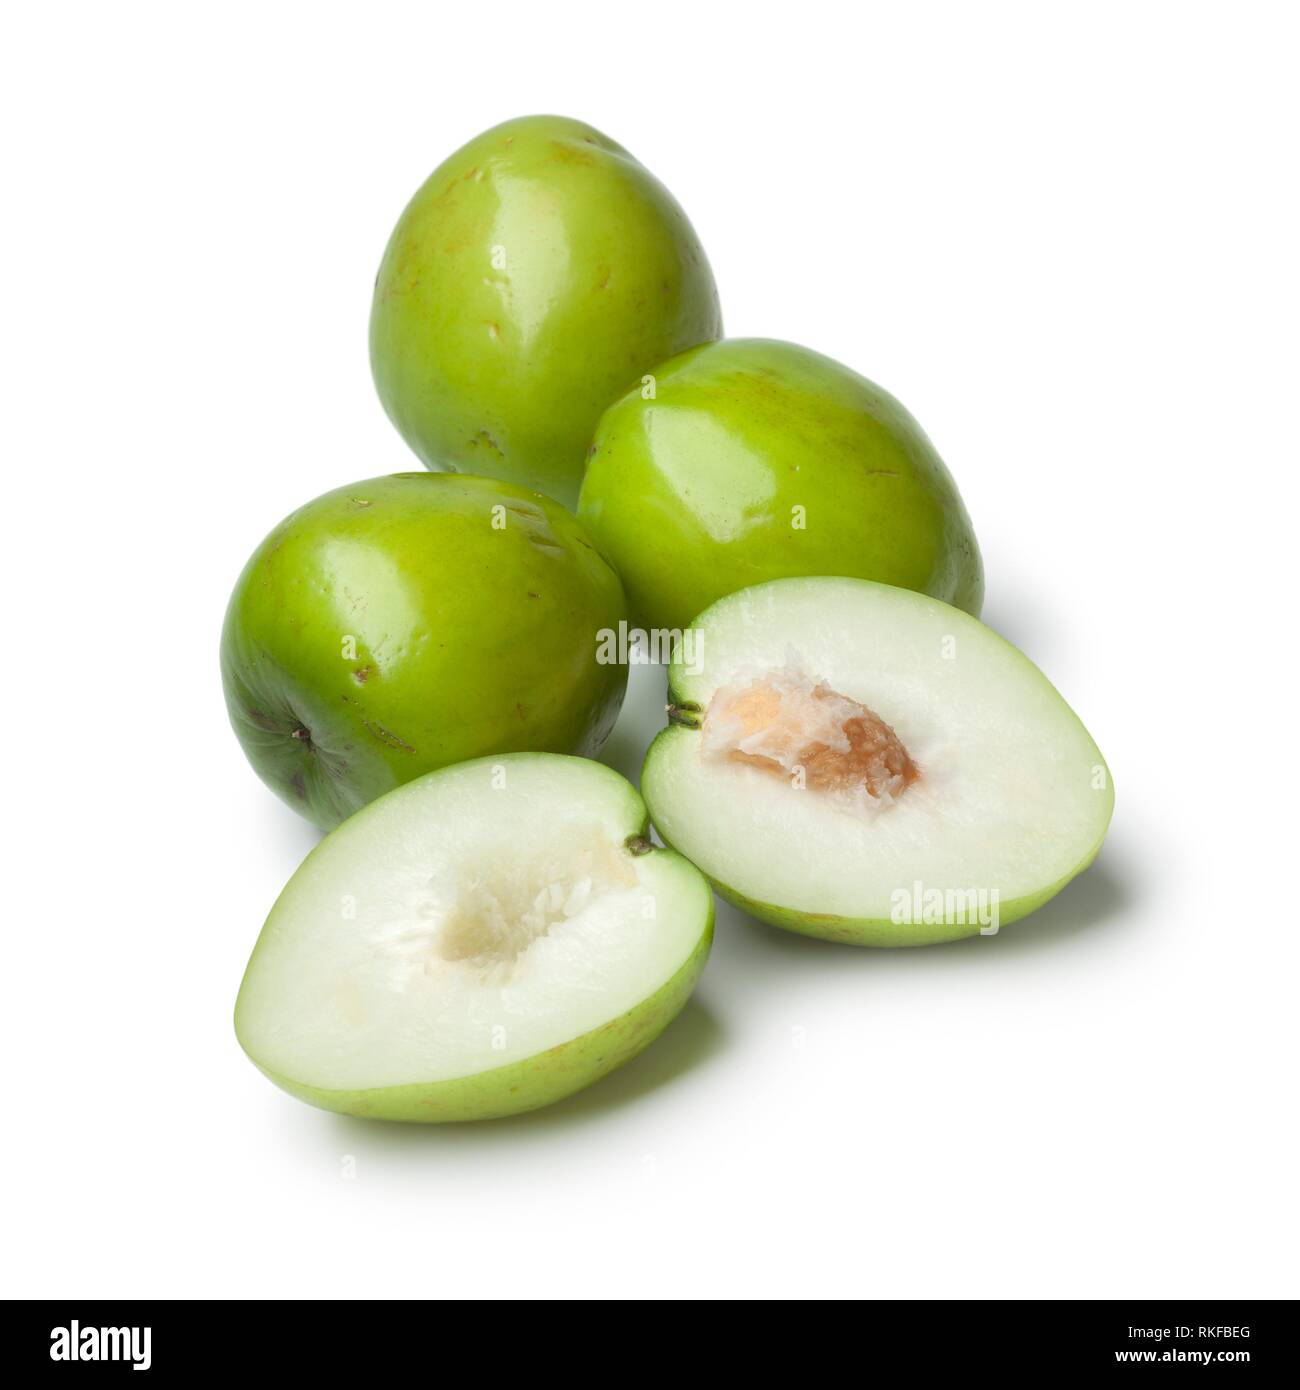 Fresh green whole and half Ambarella fruit with a fibrous pit on white background. Stock Photo